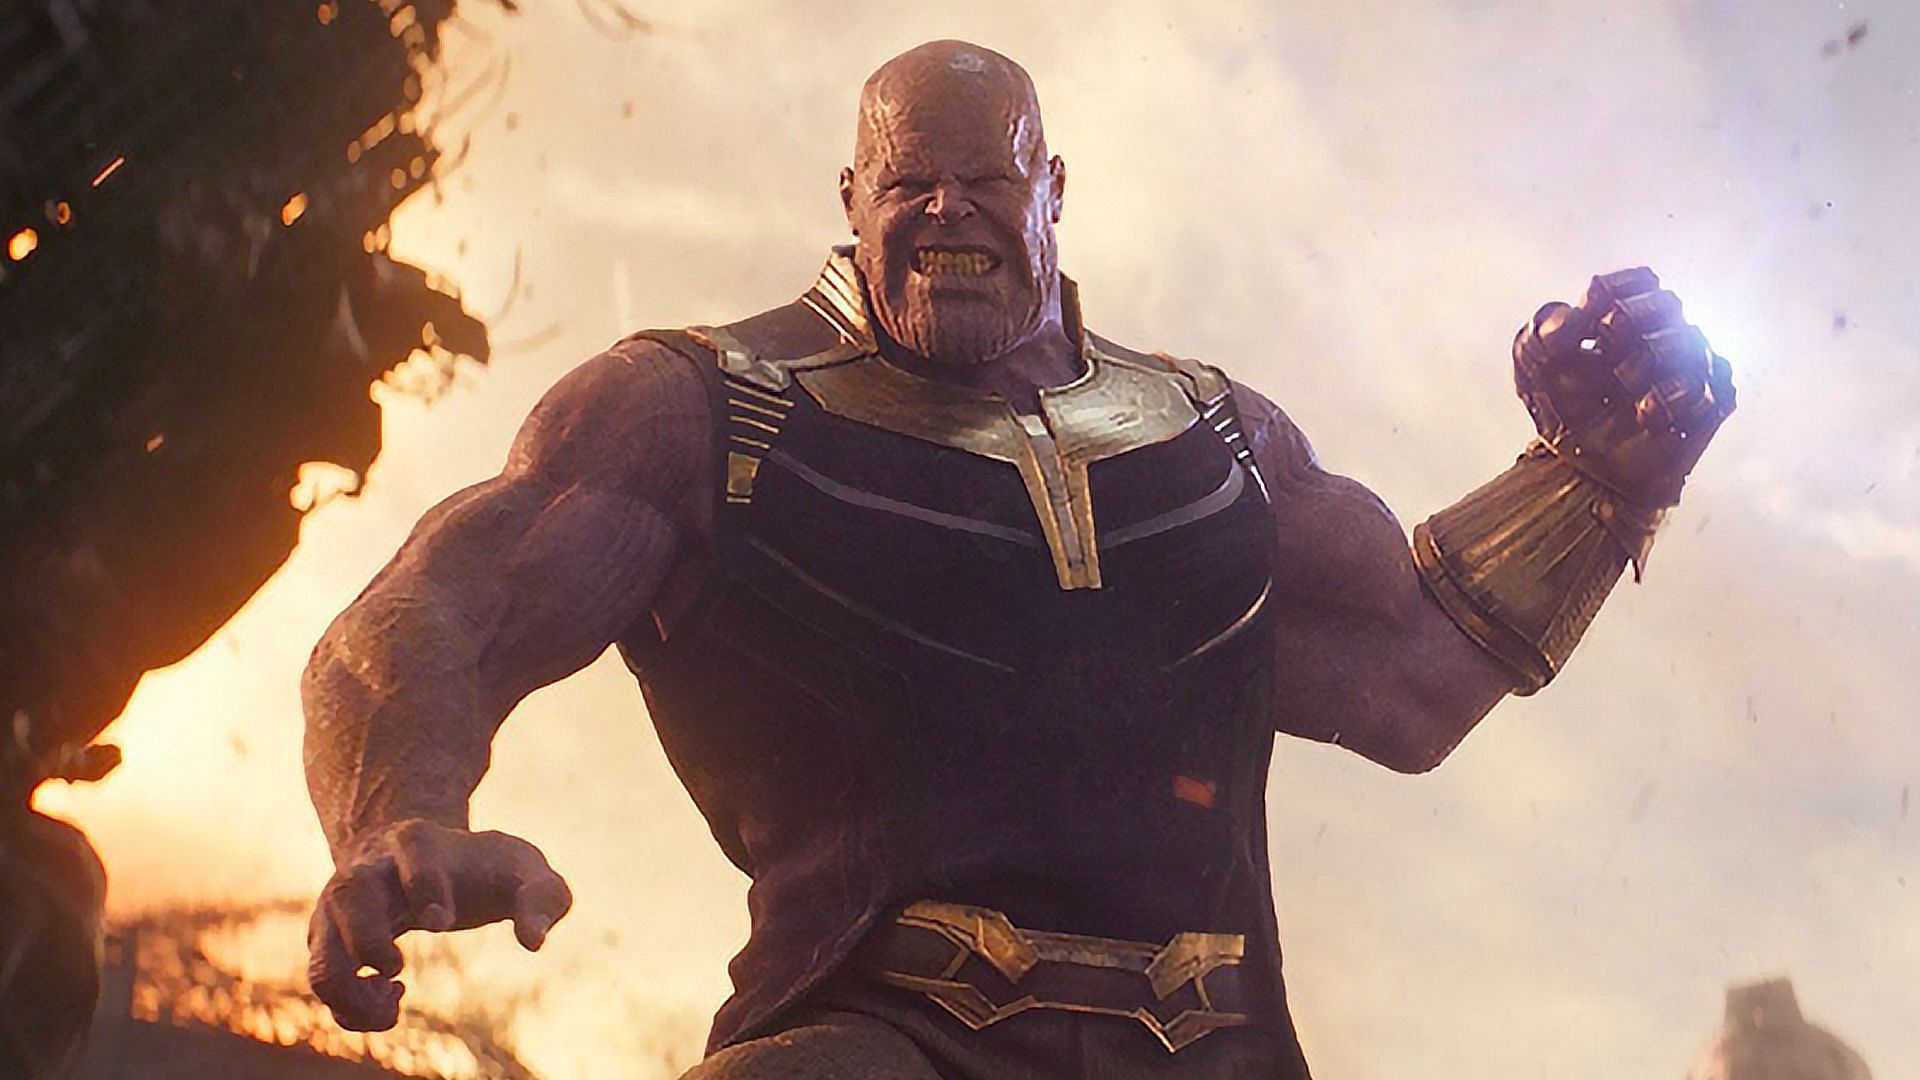 Thanos and the Infinity Gauntlet (Image via Marvel)